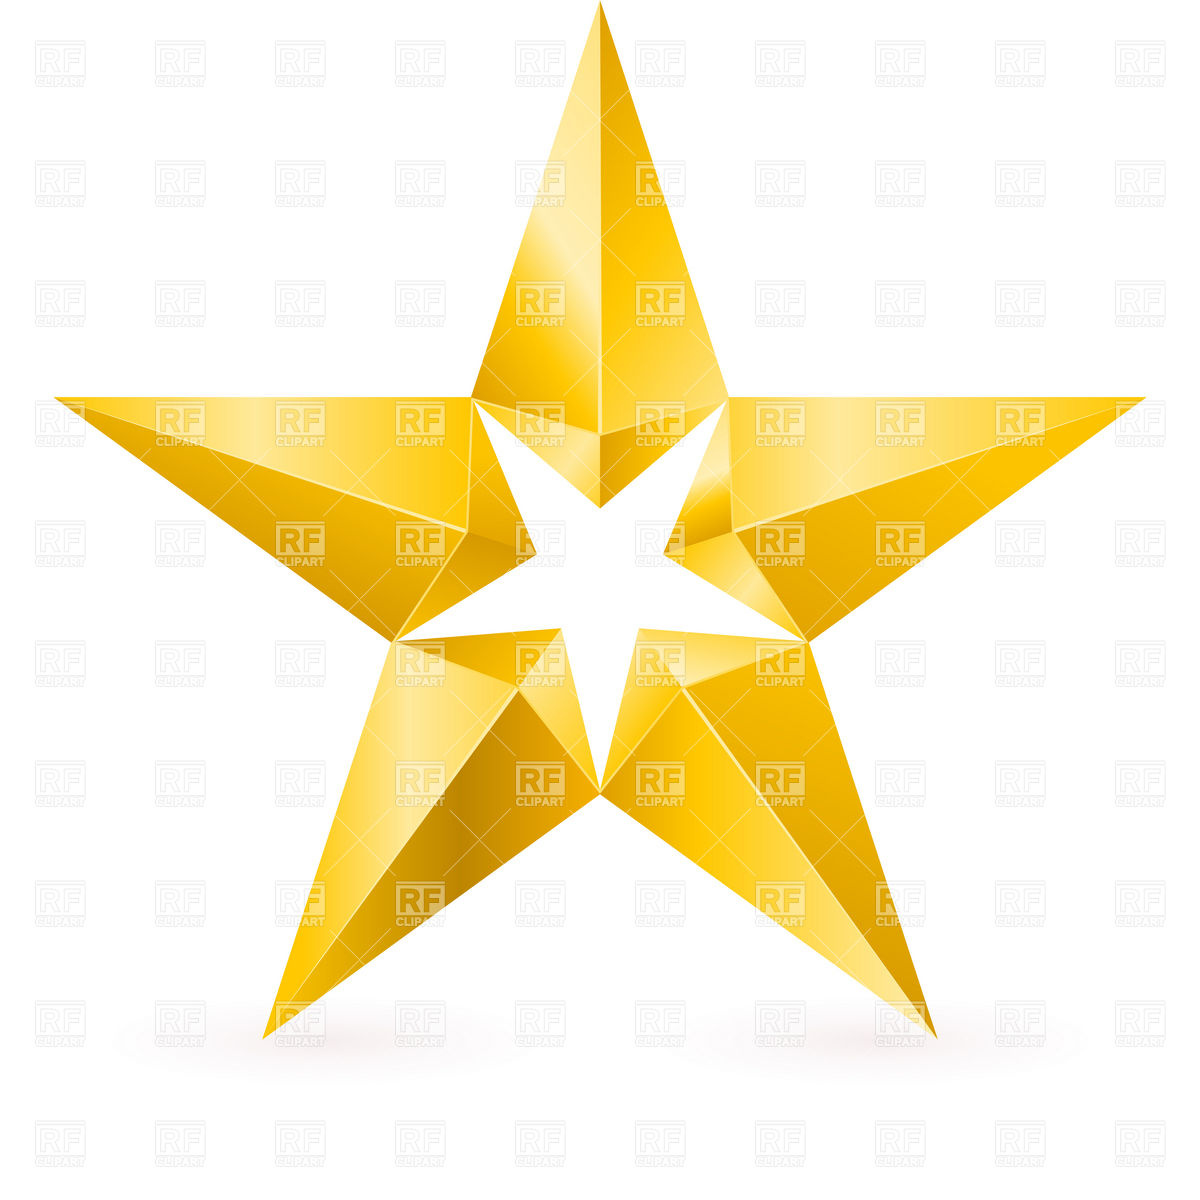 Star free to use clipart